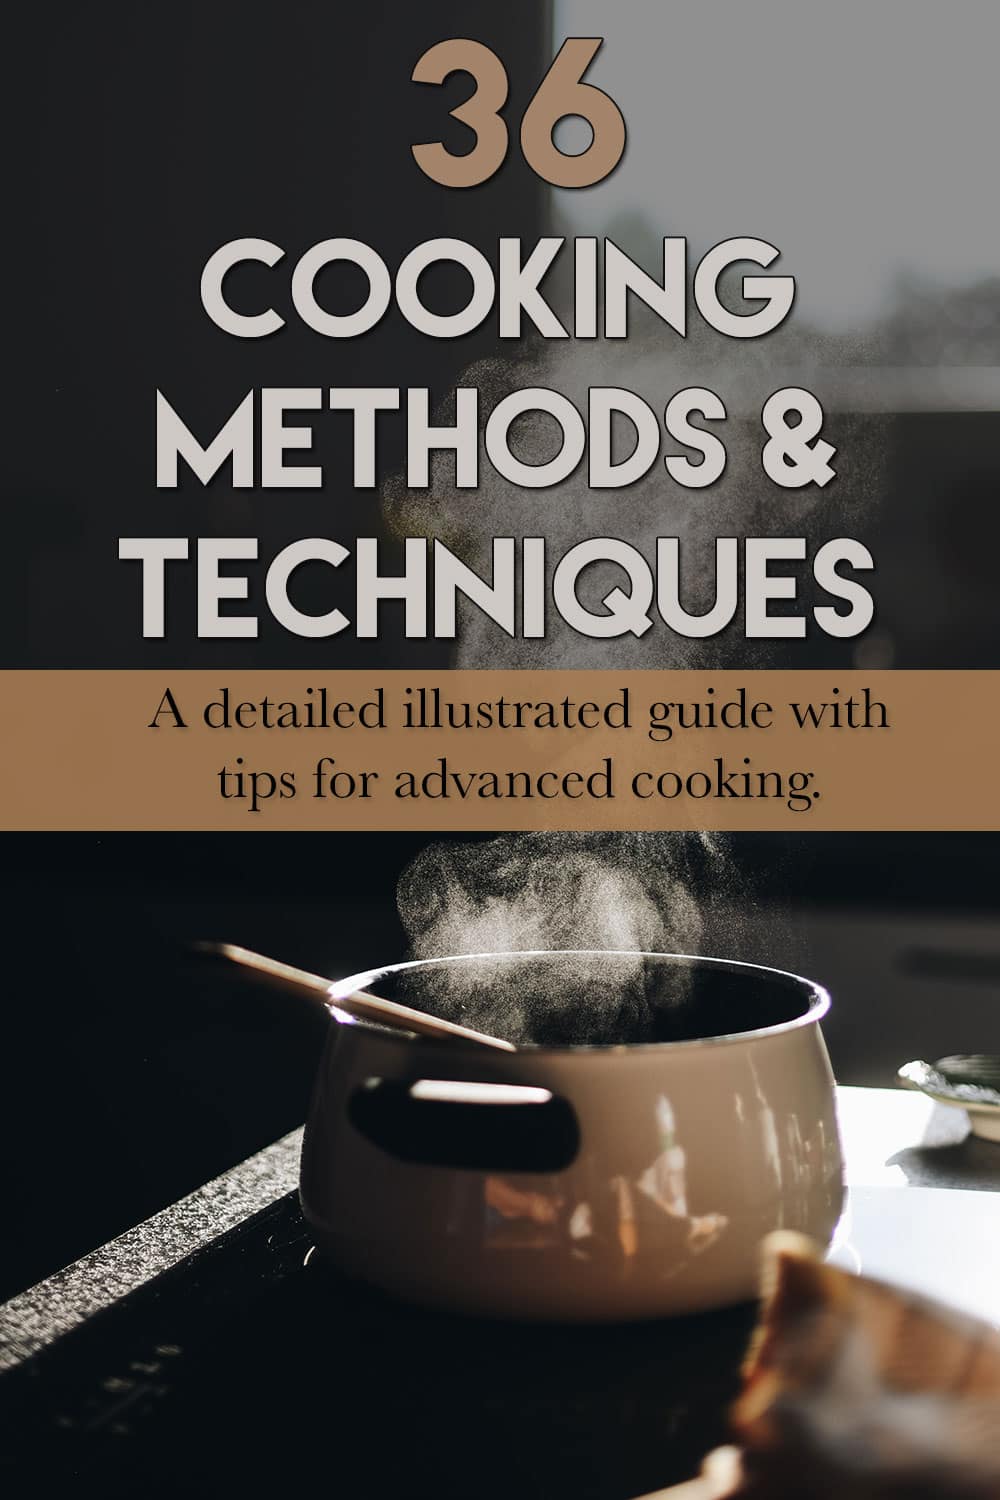 Cooking techniques and tips